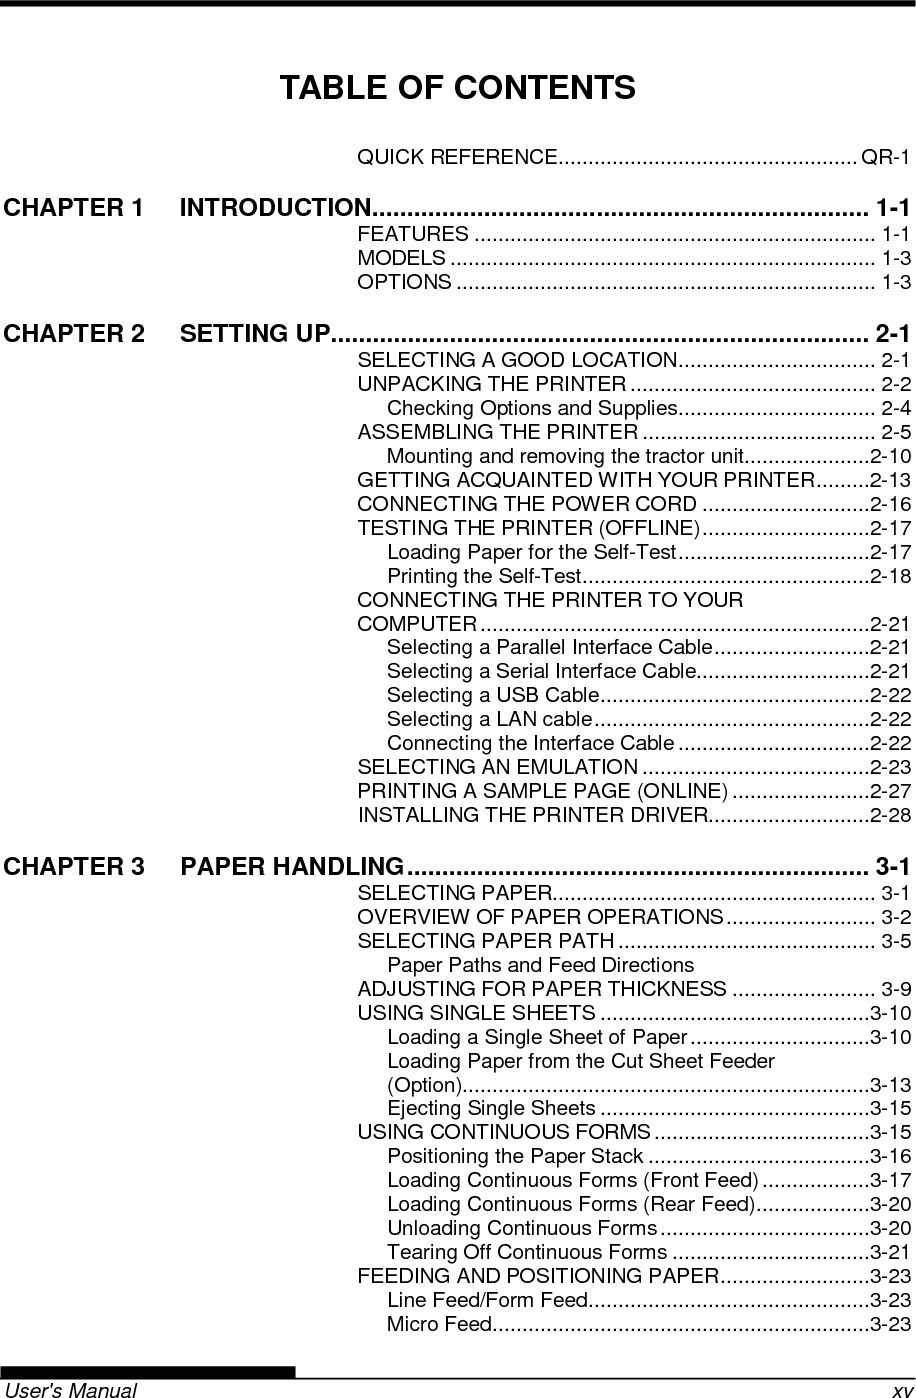   User&apos;s Manual    xv TABLE OF CONTENTS QUICK REFERENCE .................................................. QR-1 CHAPTER 1 INTRODUCTION ....................................................................... 1-1 FEATURES ................................................................... 1-1 MODELS ....................................................................... 1-3 OPTIONS ...................................................................... 1-3 CHAPTER 2 SETTING UP............................................................................. 2-1 SELECTING A GOOD LOCATION ................................. 2-1 UNPACKING THE PRINTER ......................................... 2-2 Checking Options and Supplies ................................. 2-4 ASSEMBLING THE PRINTER ....................................... 2-5 Mounting and removing the tractor unit .....................2-10 GETTING ACQUAINTED WITH YOUR PRINTER .........2-13 CONNECTING THE POWER CORD ............................2-16 TESTING THE PRINTER (OFFLINE) ............................2-17 Loading Paper for the Self-Test ................................2-17 Printing the Self-Test ................................................2-18 CONNECTING THE PRINTER TO YOUR COMPUTER .................................................................2-21 Selecting a Parallel Interface Cable ..........................2-21 Selecting a Serial Interface Cable.............................2-21 Selecting a USB Cable .............................................2-22 Selecting a LAN cable ..............................................2-22 Connecting the Interface Cable ................................2-22 SELECTING AN EMULATION ......................................2-23 PRINTING A SAMPLE PAGE (ONLINE) .......................2-27 INSTALLING THE PRINTER DRIVER...........................2-28 CHAPTER 3 PAPER HANDLING .................................................................. 3-1 SELECTING PAPER...................................................... 3-1 OVERVIEW OF PAPER OPERATIONS ......................... 3-2 SELECTING PAPER PATH ........................................... 3-5 Paper Paths and Feed Directions ADJUSTING FOR PAPER THICKNESS ........................ 3-9 USING SINGLE SHEETS .............................................3-10 Loading a Single Sheet of Paper ..............................3-10 Loading Paper from the Cut Sheet Feeder (Option)....................................................................3-13 Ejecting Single Sheets .............................................3-15 USING CONTINUOUS FORMS ....................................3-15 Positioning the Paper Stack .....................................3-16 Loading Continuous Forms (Front Feed) ..................3-17 Loading Continuous Forms (Rear Feed) ...................3-20 Unloading Continuous Forms ...................................3-20 Tearing Off Continuous Forms .................................3-21 FEEDING AND POSITIONING PAPER .........................3-23 Line Feed/Form Feed ...............................................3-23 Micro Feed ...............................................................3-23 